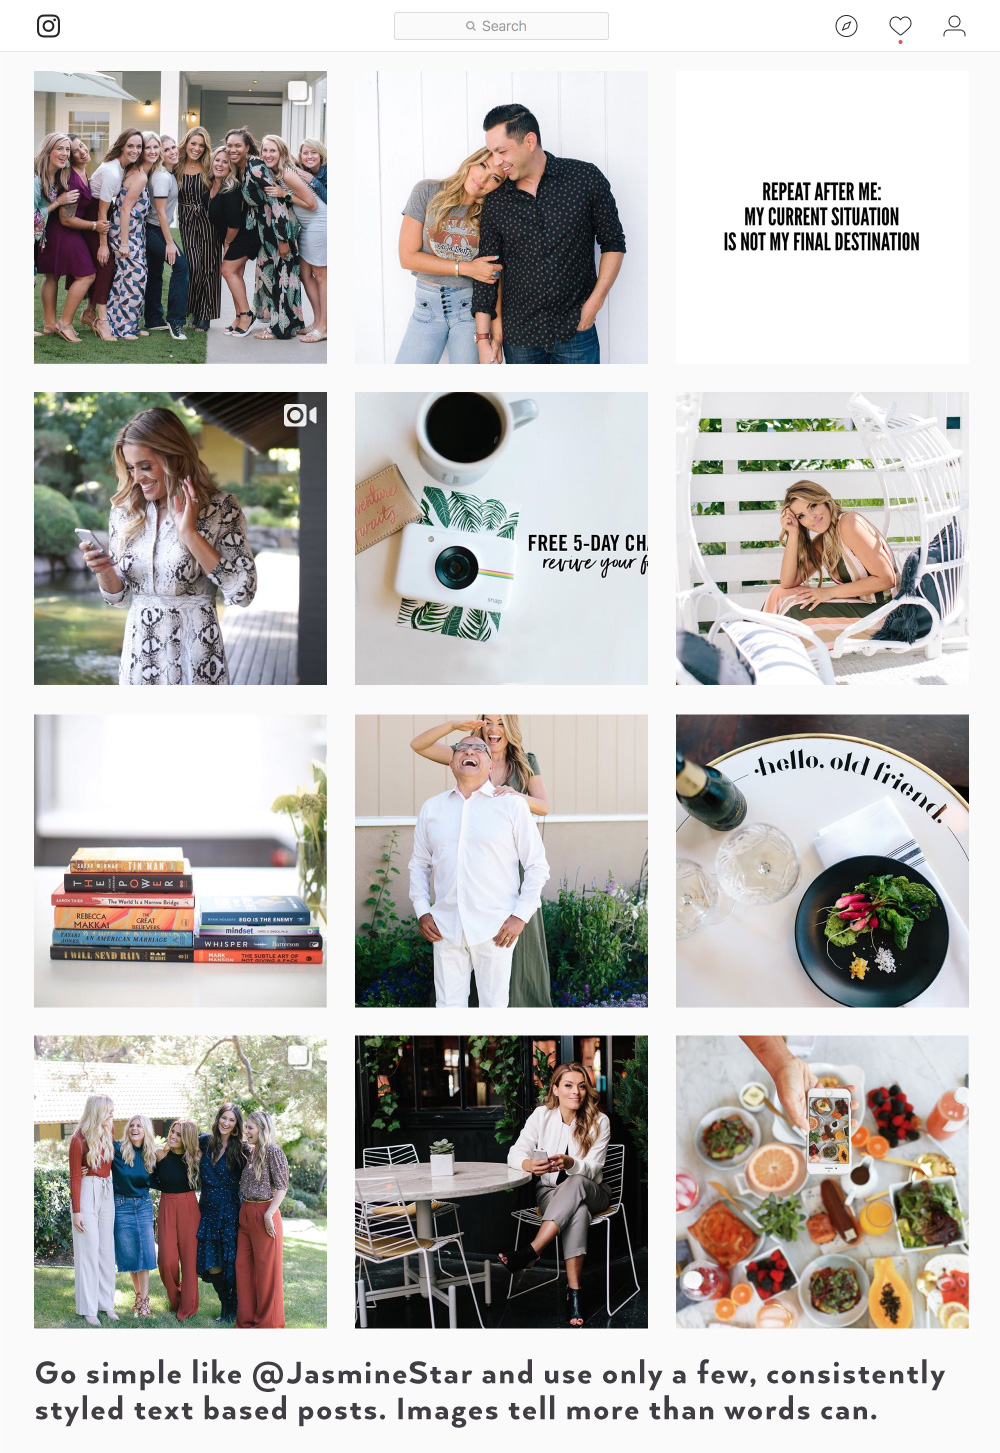 No need to go super complicated with templates for your Instagram feed. You only need these 5 to be able to post in style